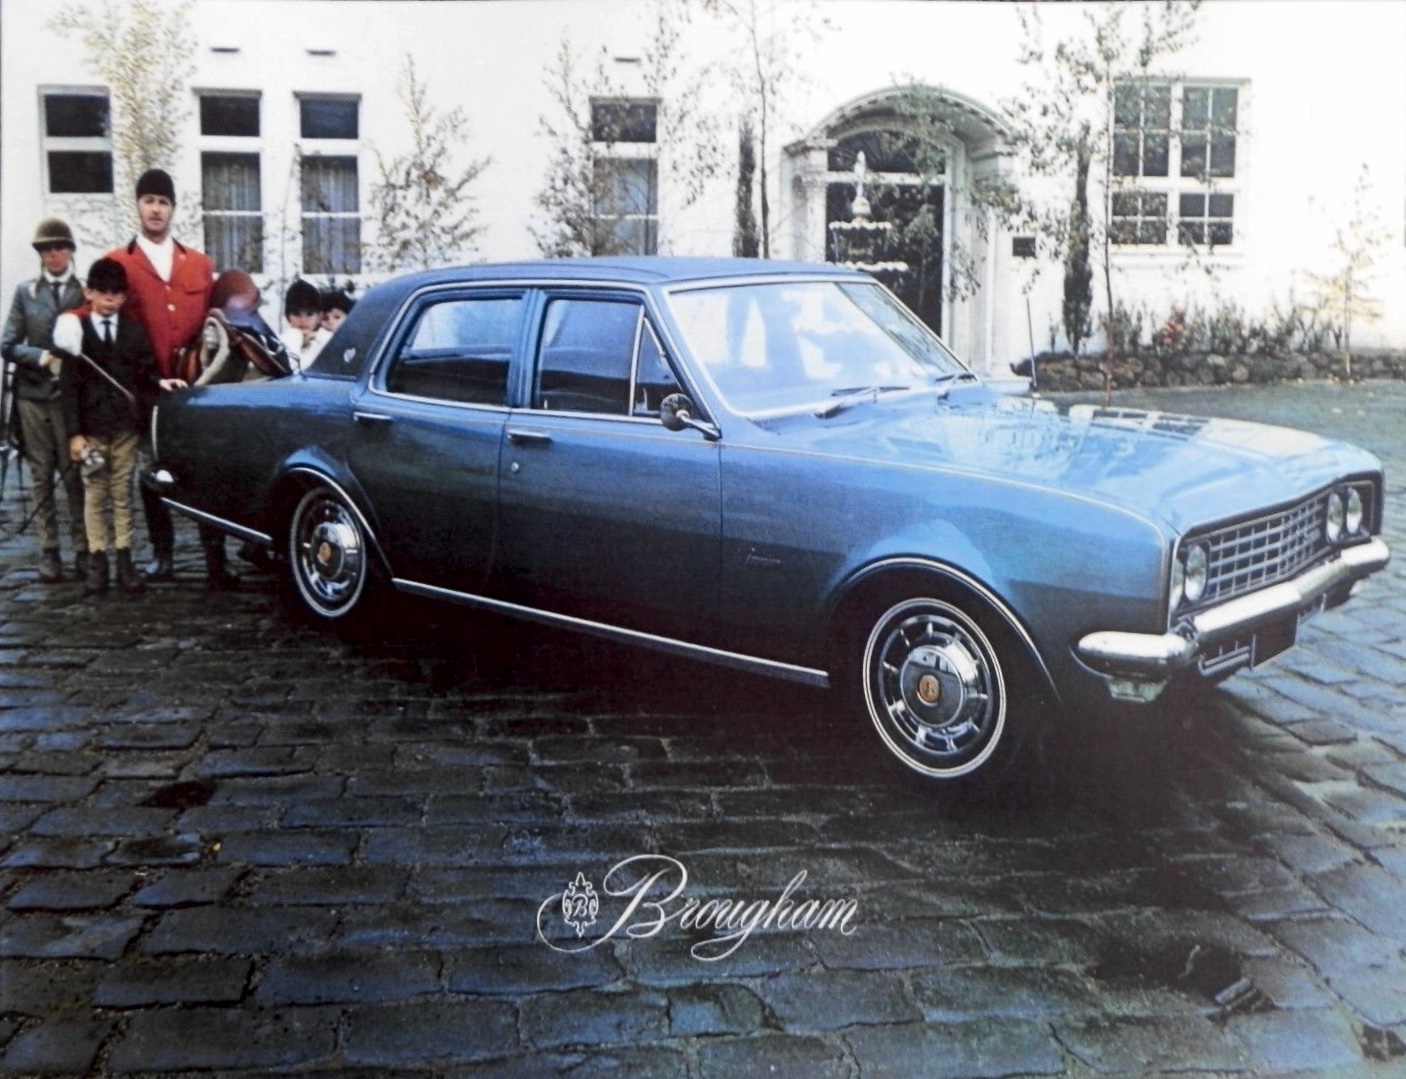 1970 HG Holden Brougham Brochure Page 1